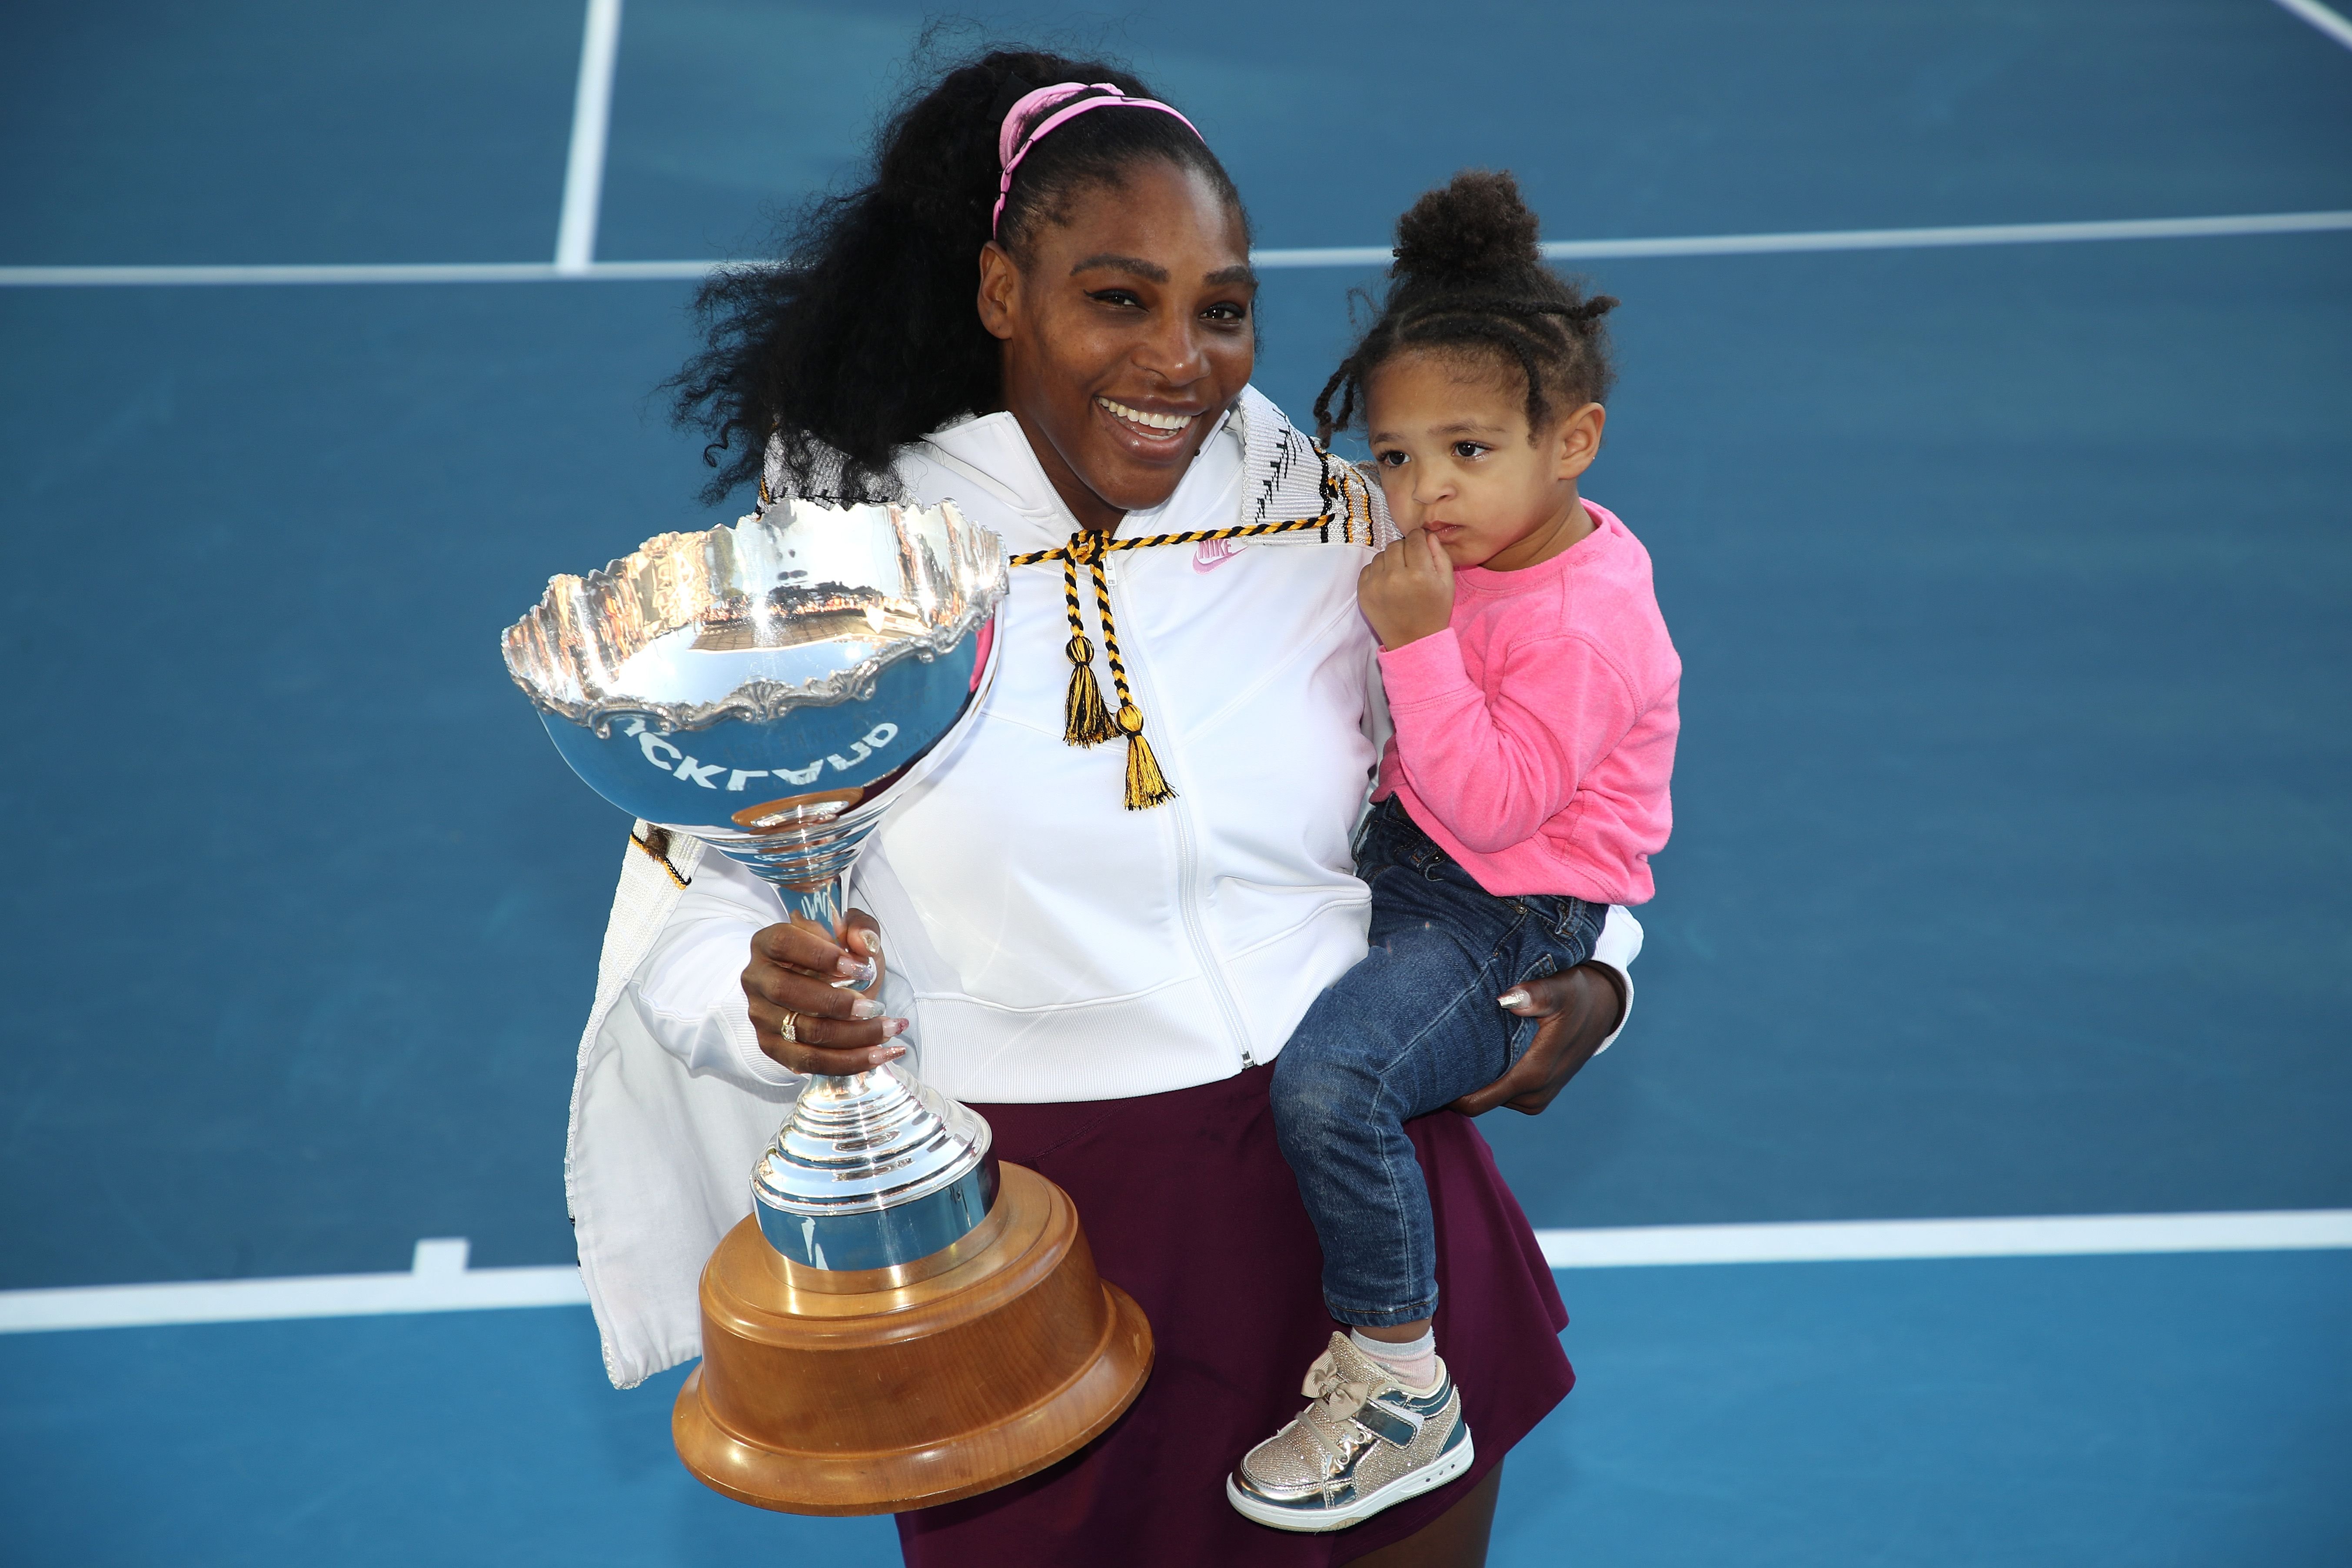 Serena Williams holds her daughter Alexis Olympia with her trophy after her match with Jessica Pegula on Day 7 of the 2020 Women's ASB Classic at ASB Tennis Centre in January 2020 | Photo: Getty Images